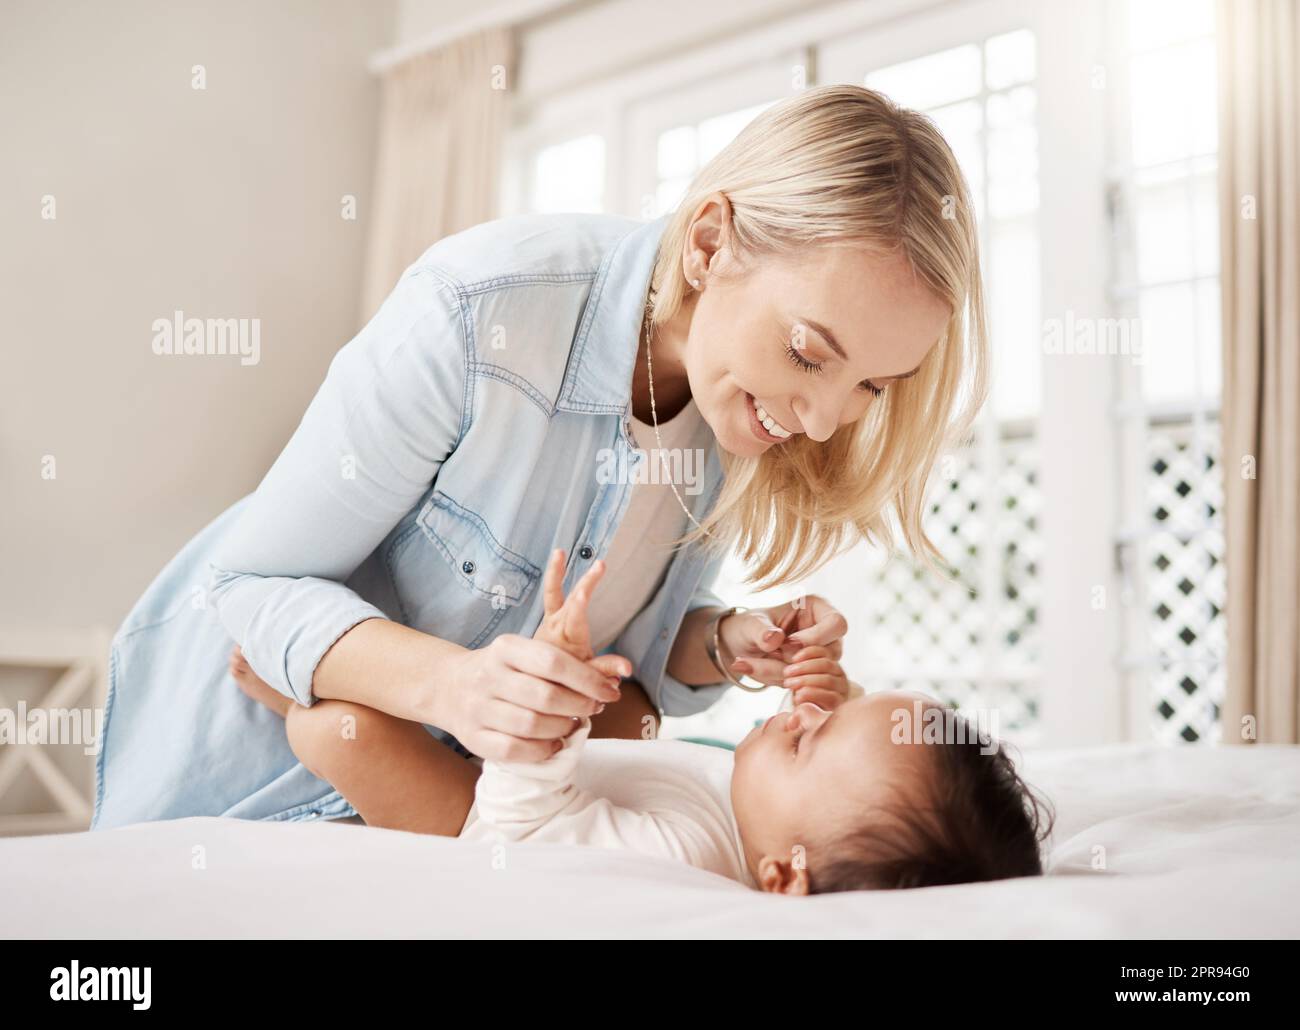 Are you ready for another fun day. a woman bonding with her baby at home. Stock Photo